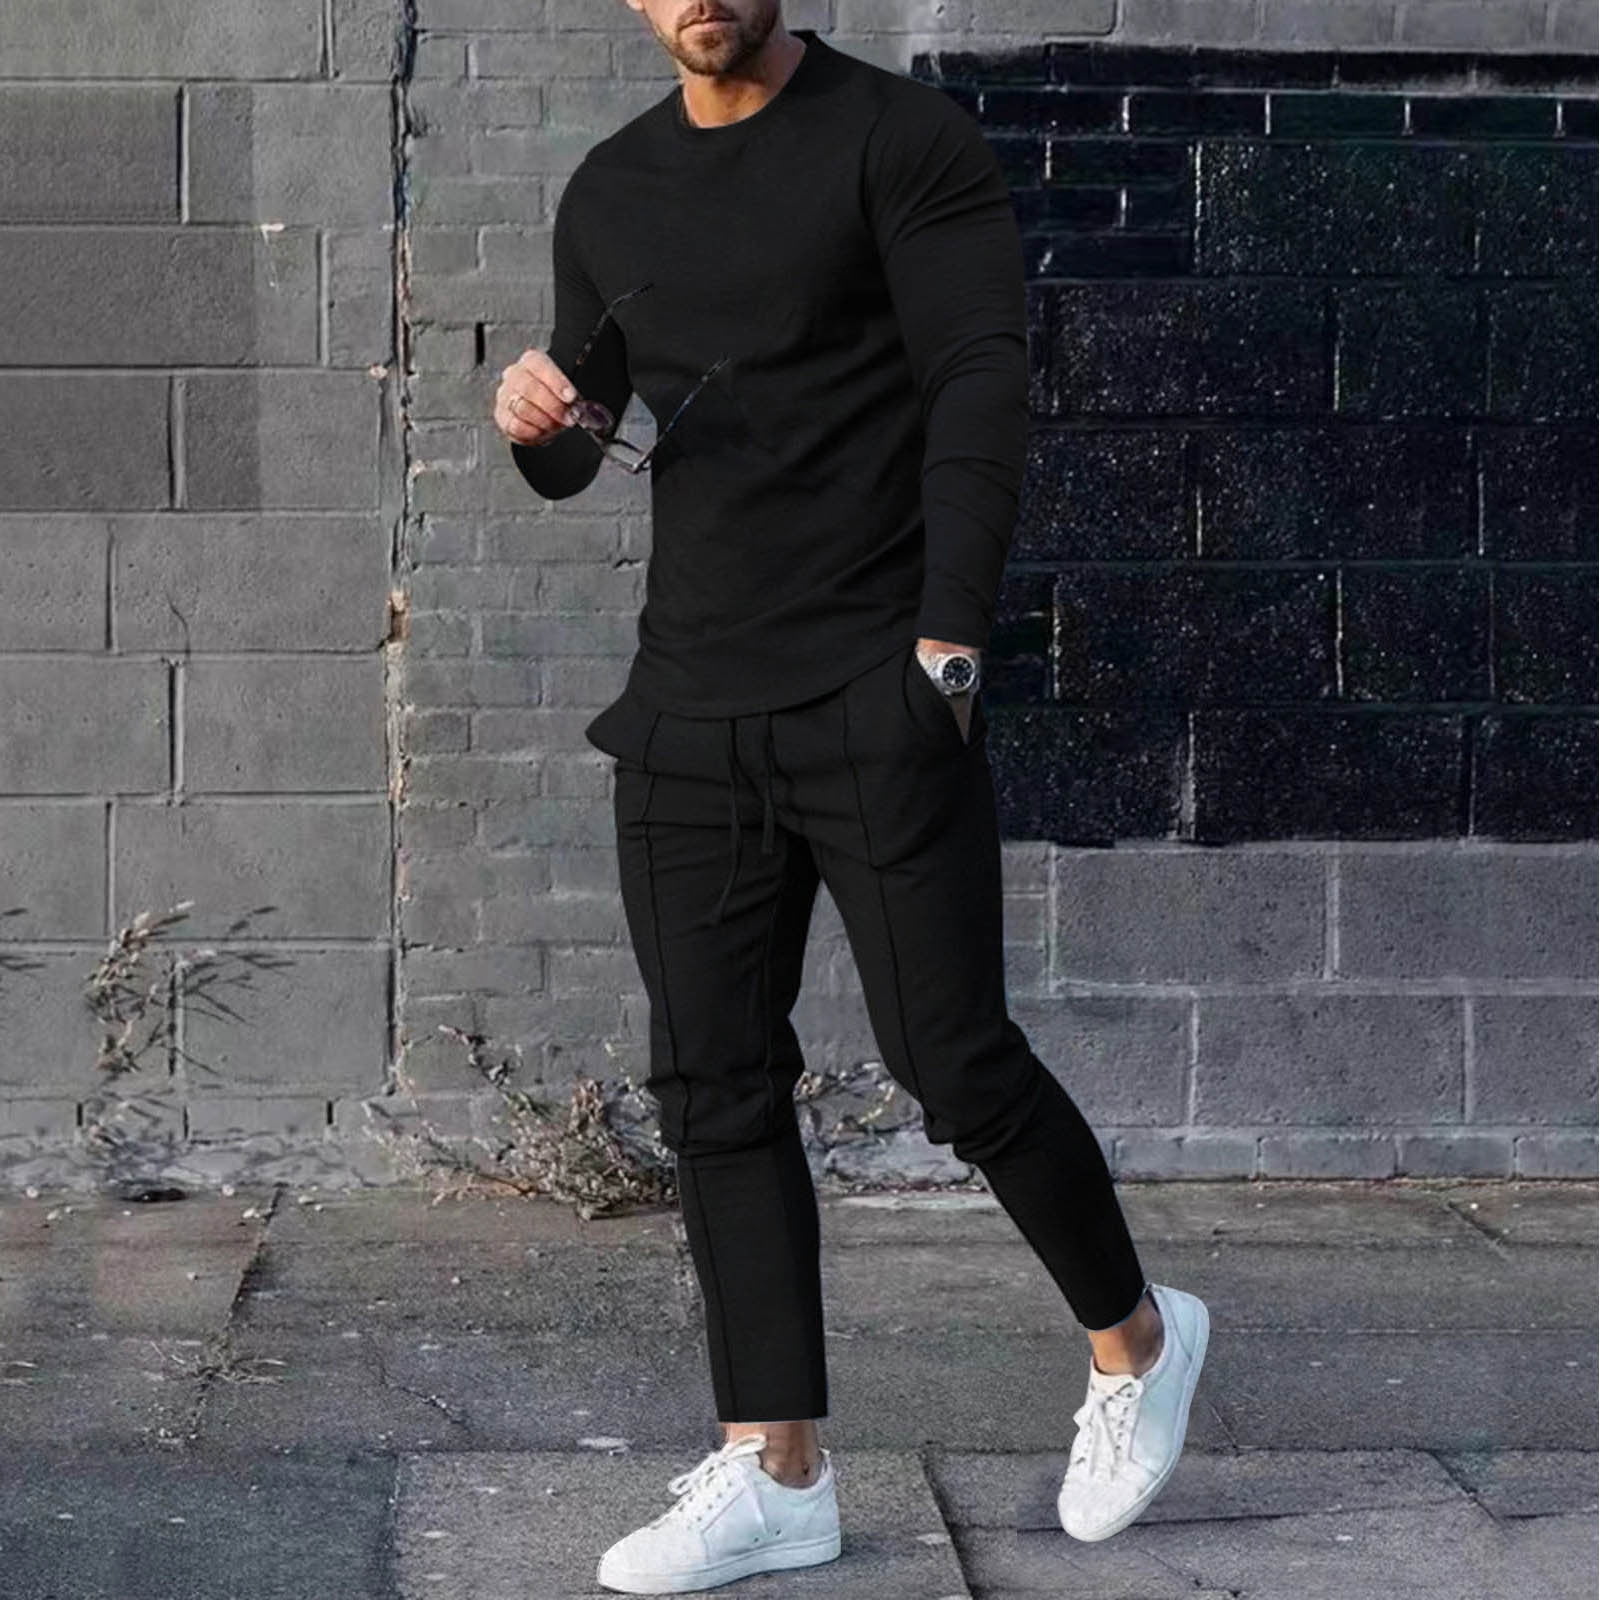 Kayannuo Sweat Pants for Men Spring Christmas Clearance Men s Solid Color Suit Round Neck Long Sleeve T Shirt Trousers Tight Two Piece Set Black 486c0df9 e2a9 4481 a3b7 6e0358f8aafb.f6156c34ab260777886f47b13e033ac8